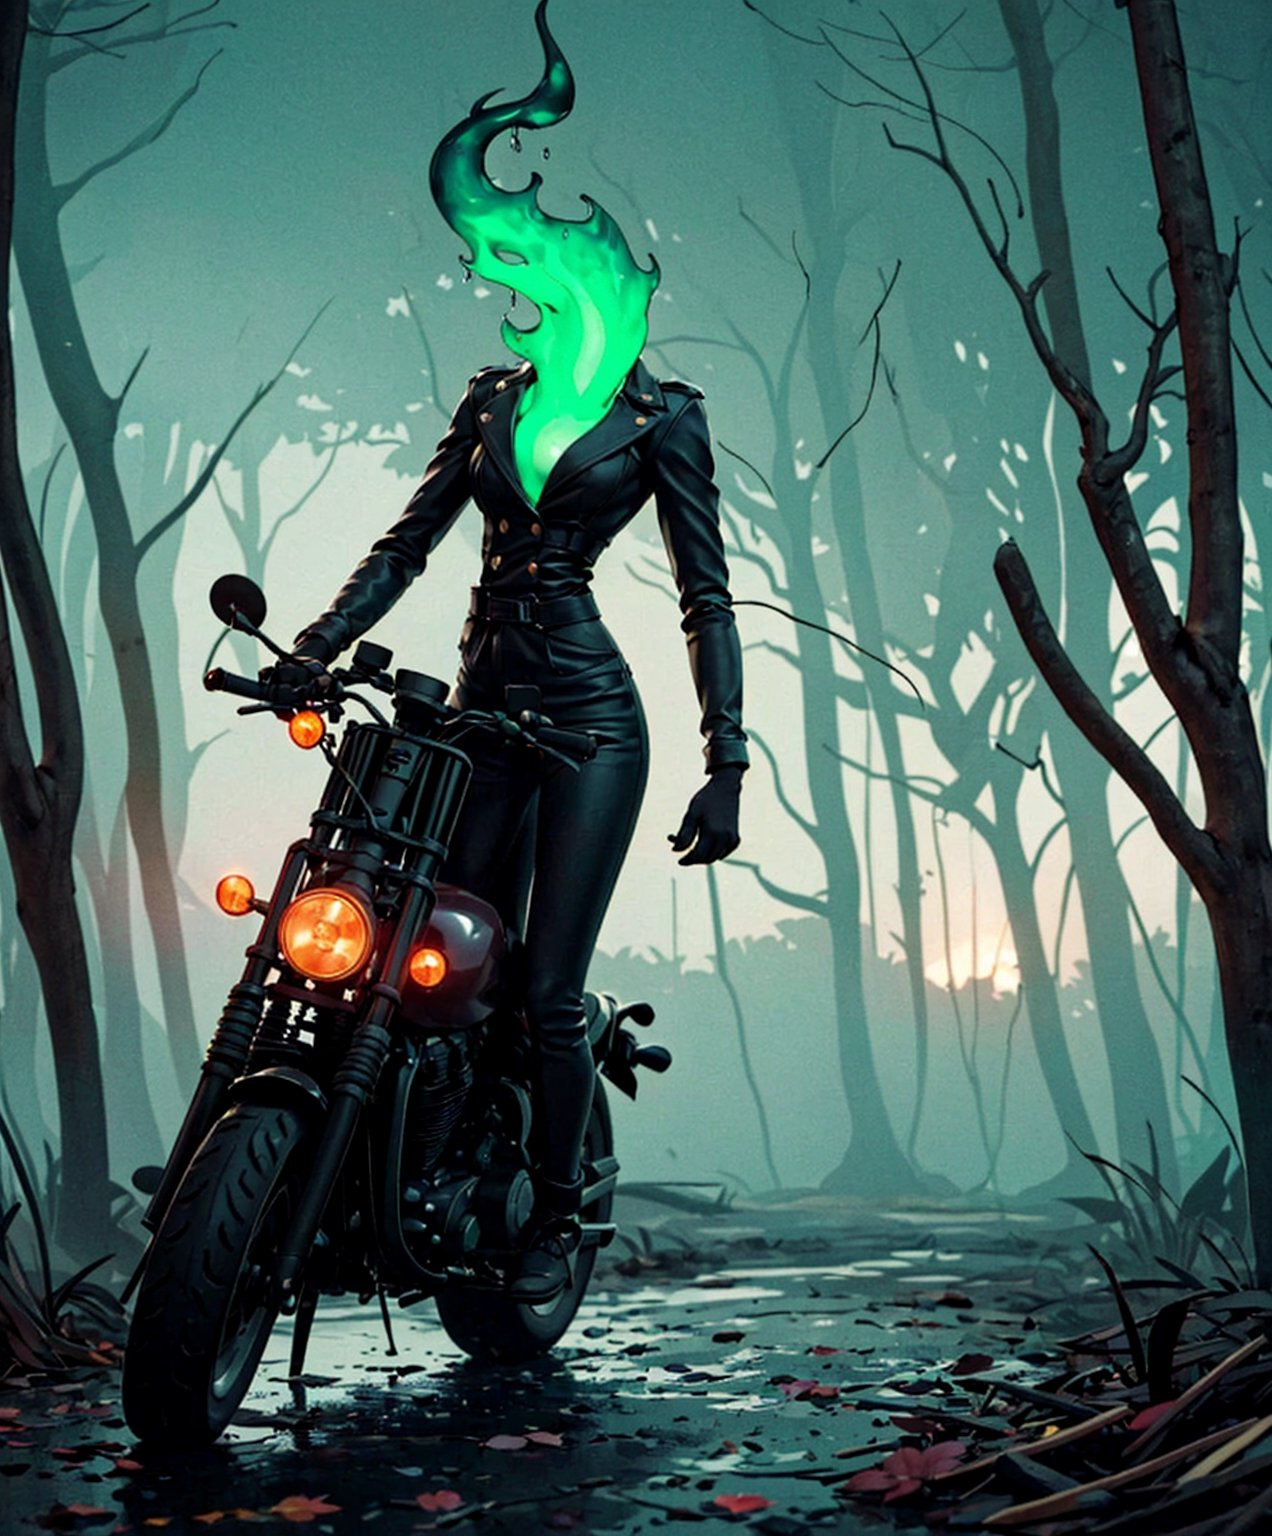 (((1 headless horsewoman))) she rides a burning 1930 Harley Davidson motorcycle down a wooded highway on a dark night. Wearing a leather jacket, (cleavage),cape flapping,(((No head)))(((decapitated)))(((headless)))(((no helmet)))(((green flames out of neck hole)))(((The motorcycle has the an iron horse head welded to the front, it's eyes serve as headlights))),(holding a machete)

 (((Drippy, burnt ember asthetic))), ((gnarly spooky trees)), autumn leaves, (((green fog))), crescent moon, ((weird mushroom ghosts in the background))

(((an iron horse head is welded on to the front of motorcycle, (rider has no head, she is decapitated, she is headless),))),halloweentech,art by Stephen Gammell,fire that looks like...,HellAI,horror